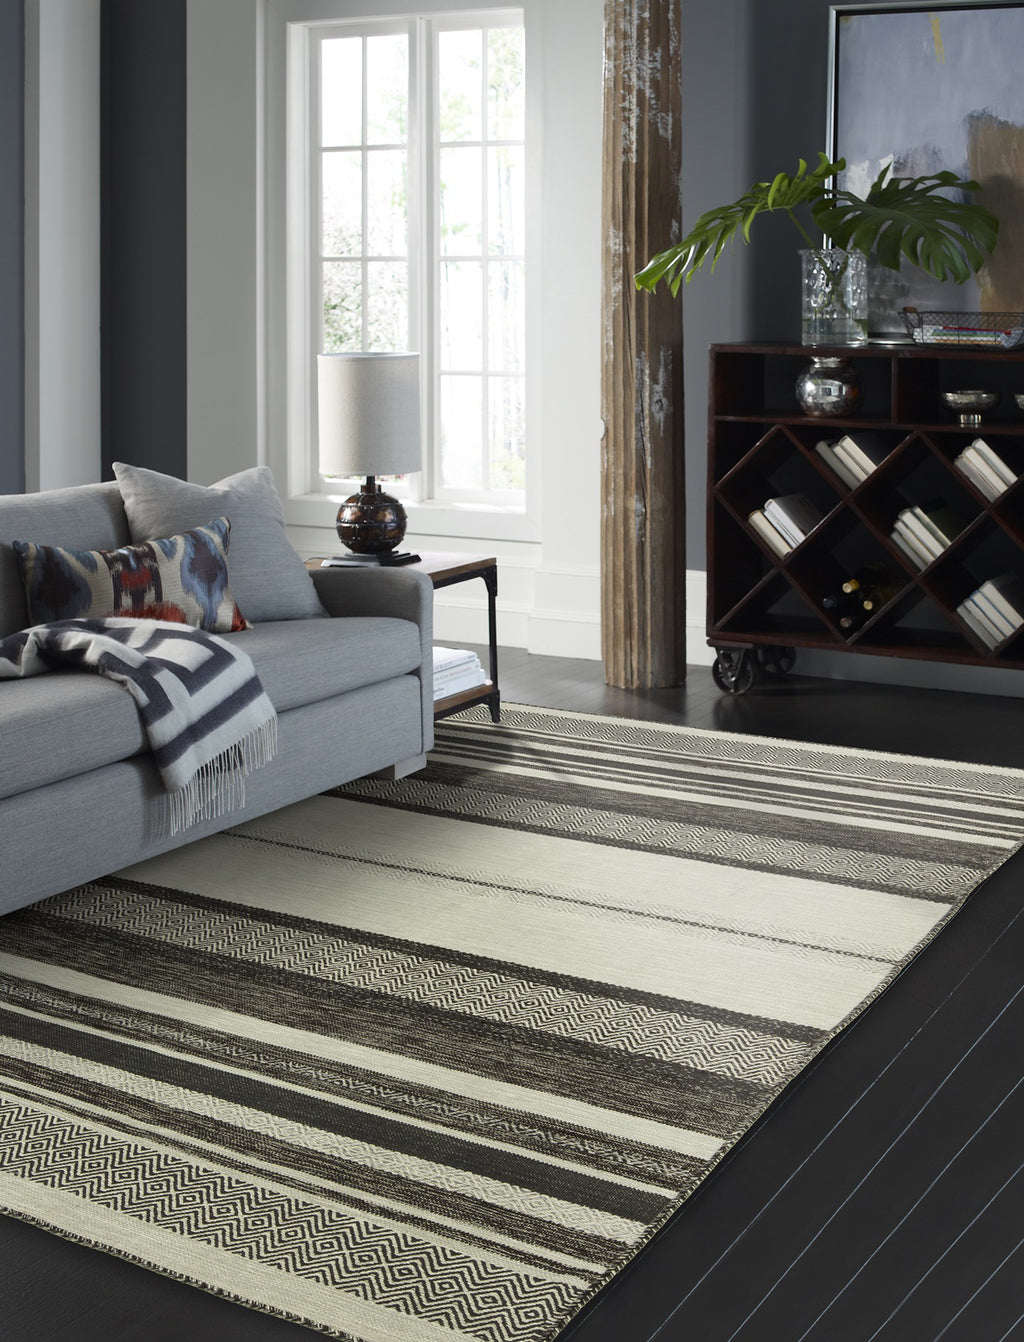 Kalaty Andes AD-622 Canyon Graphite Area Rug Room Image Feature